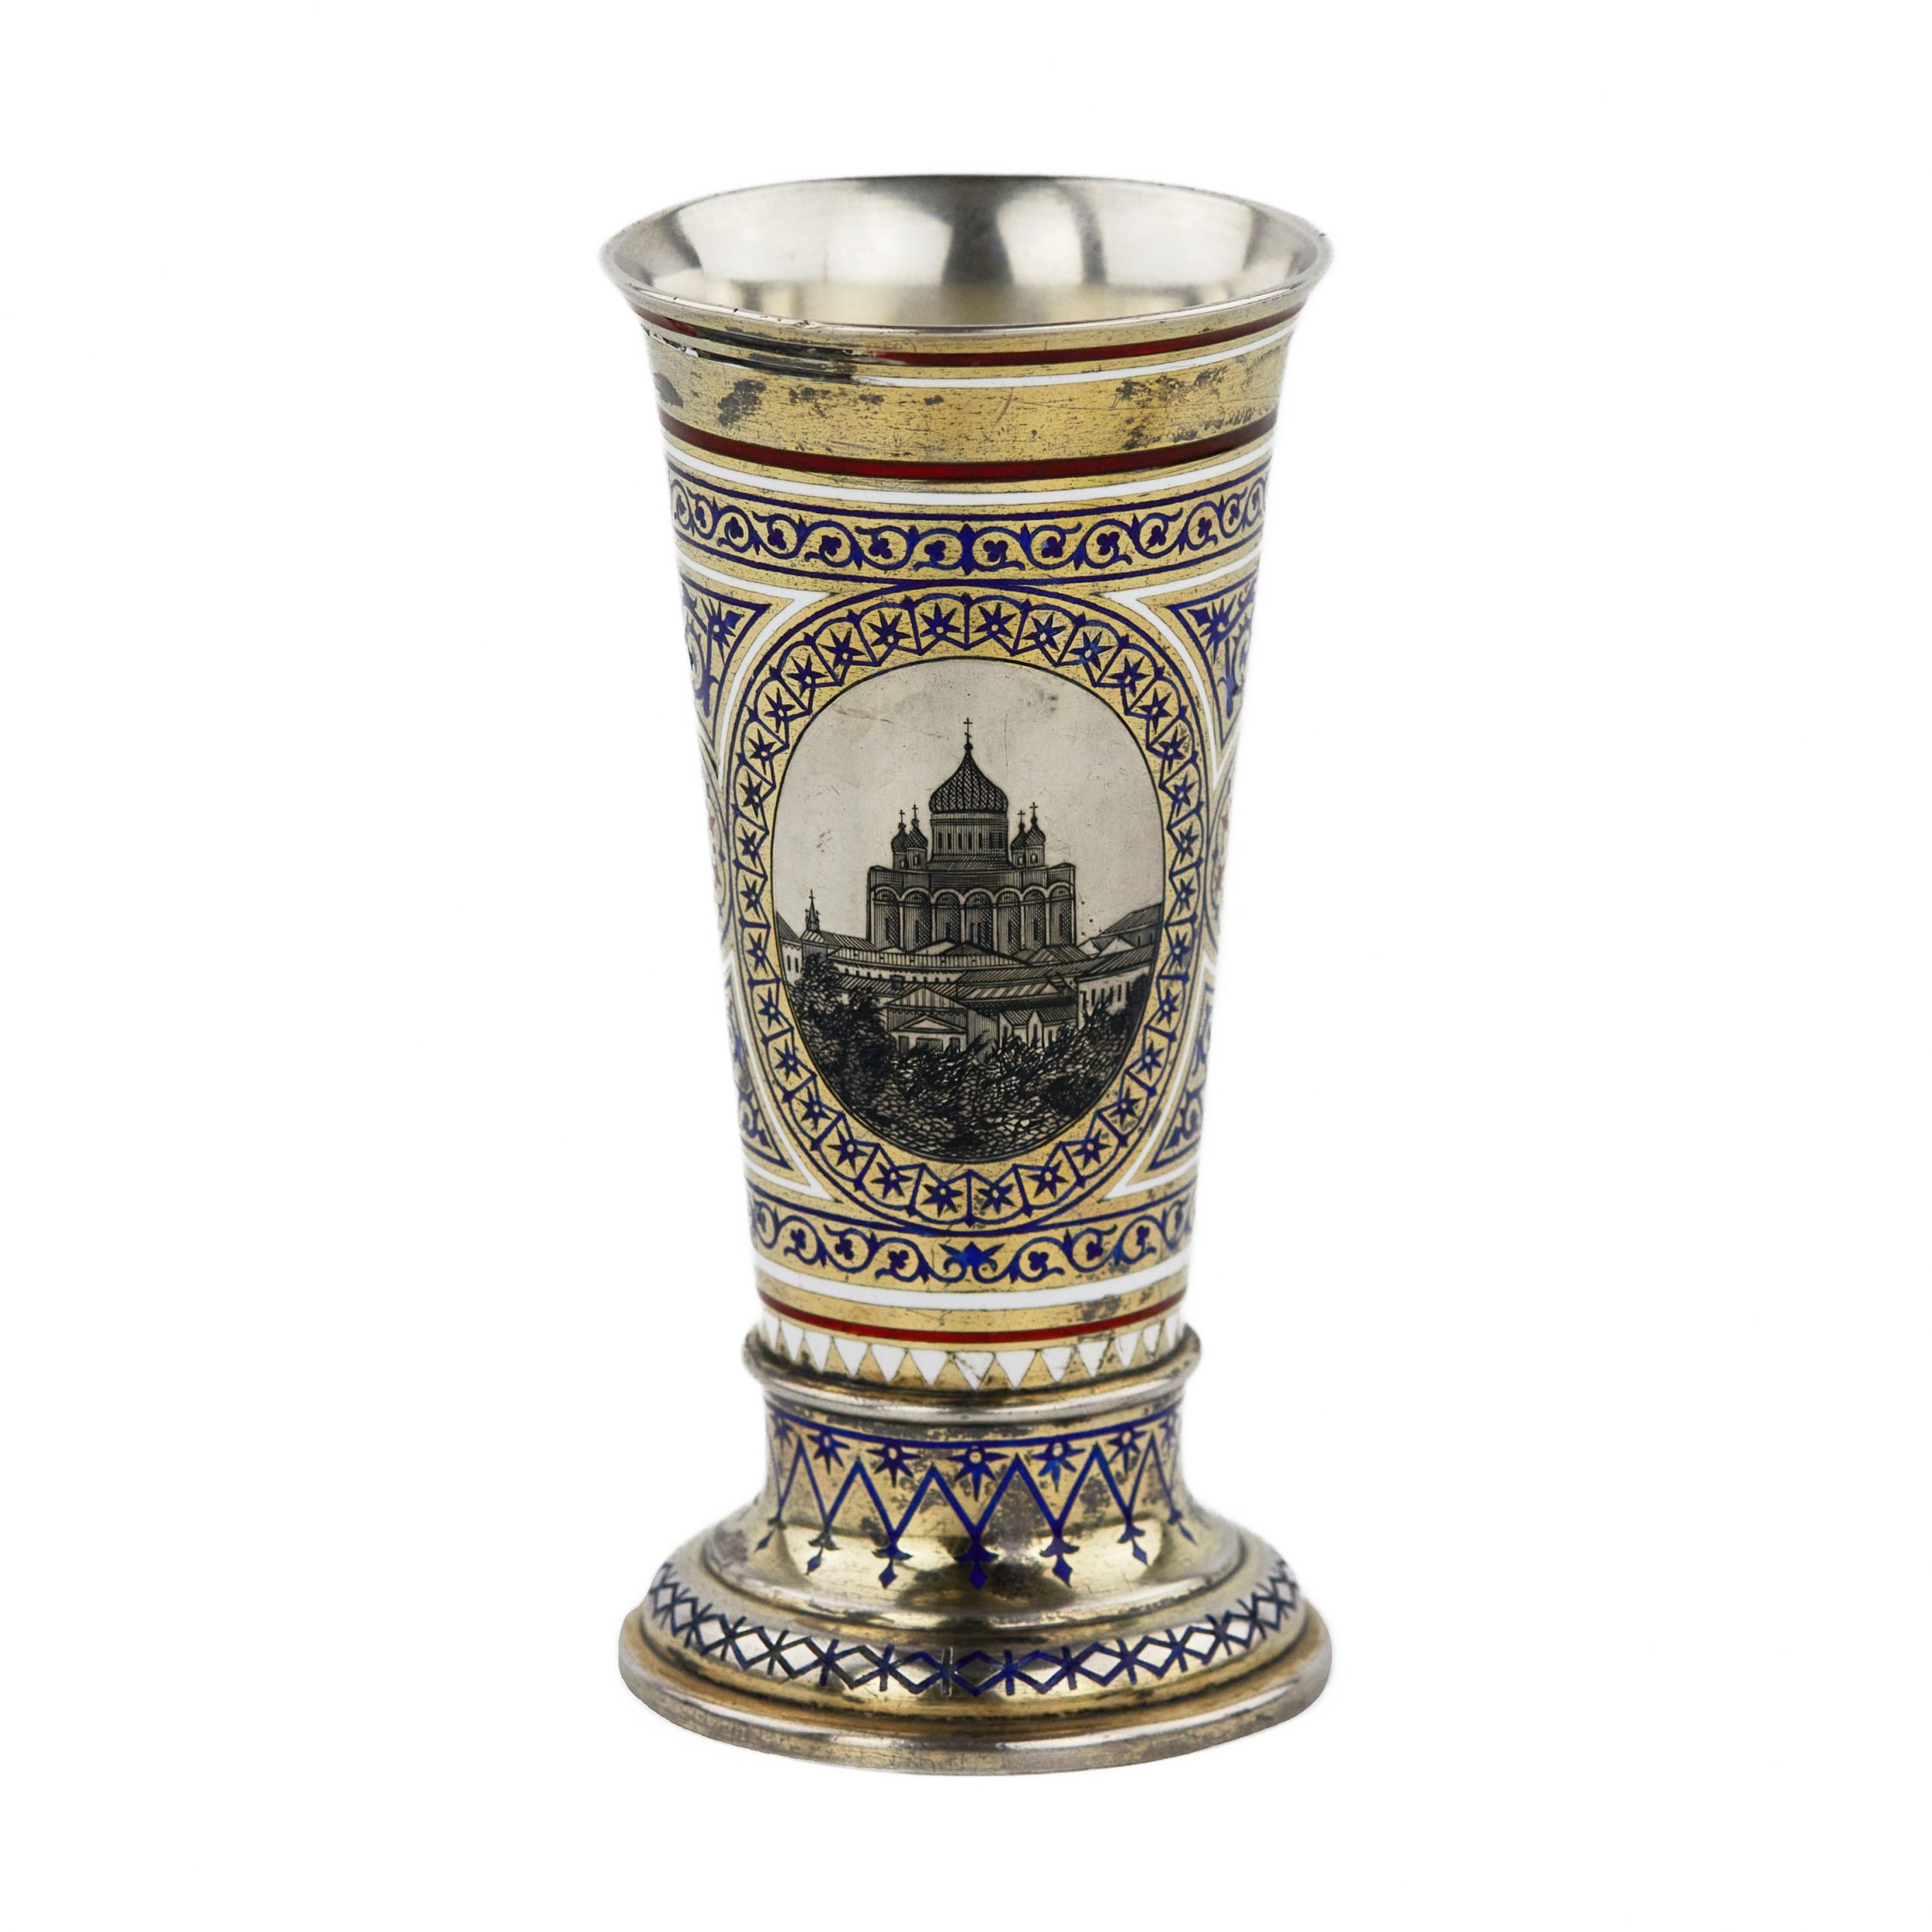 PAVEL-OVCHINNIKOV-Russian-silver-gilded-and-champleve-goblet-of-the-19th-century-stamped-by-Pavel-Ovchinnikov-Moscow-1872-Imperial-diploma-